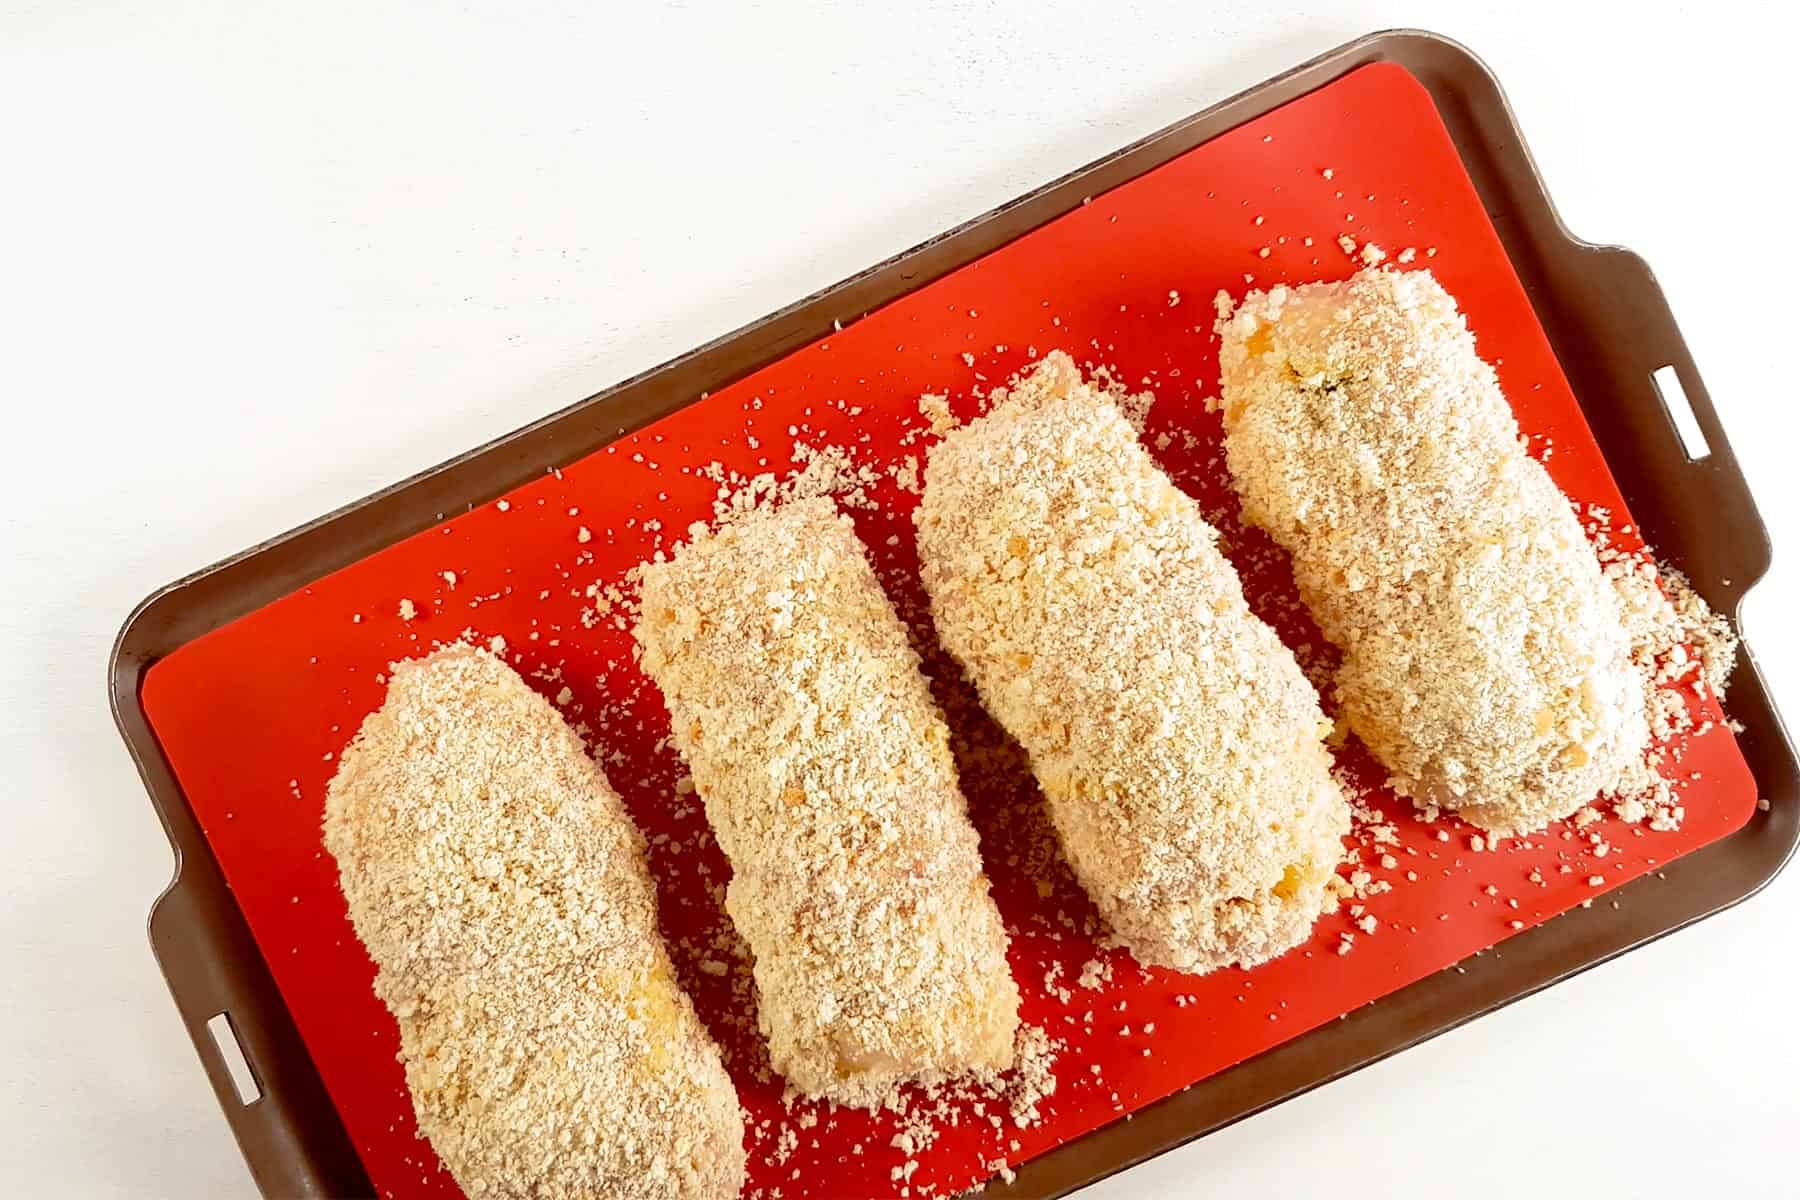 Chicken coated with panko.